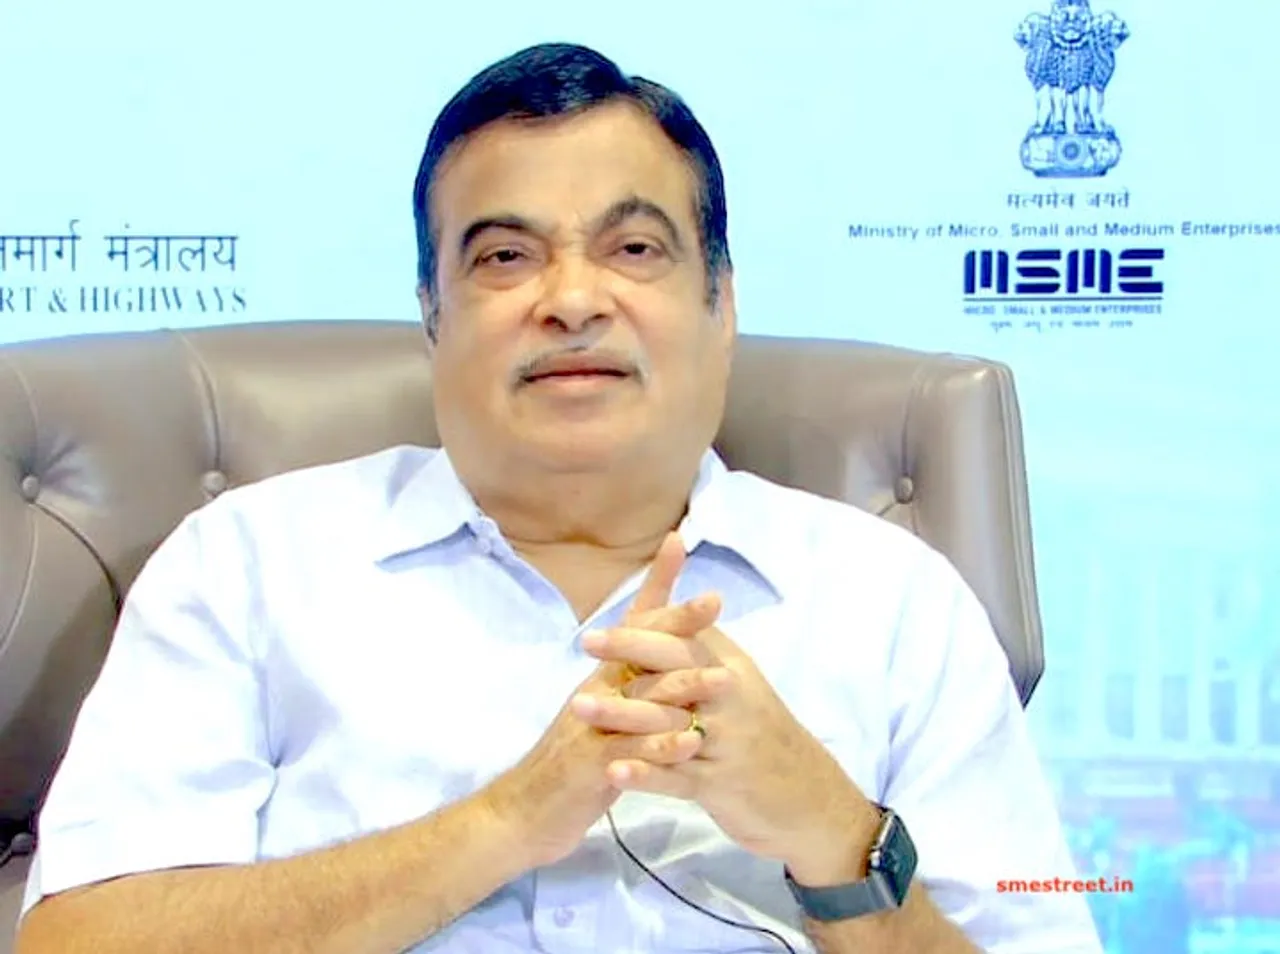 ‘Aatmanirbhar Bharat’ is All About Increasing Exports and Creating an Indian Alternative for Imports: Nitin Gadkari